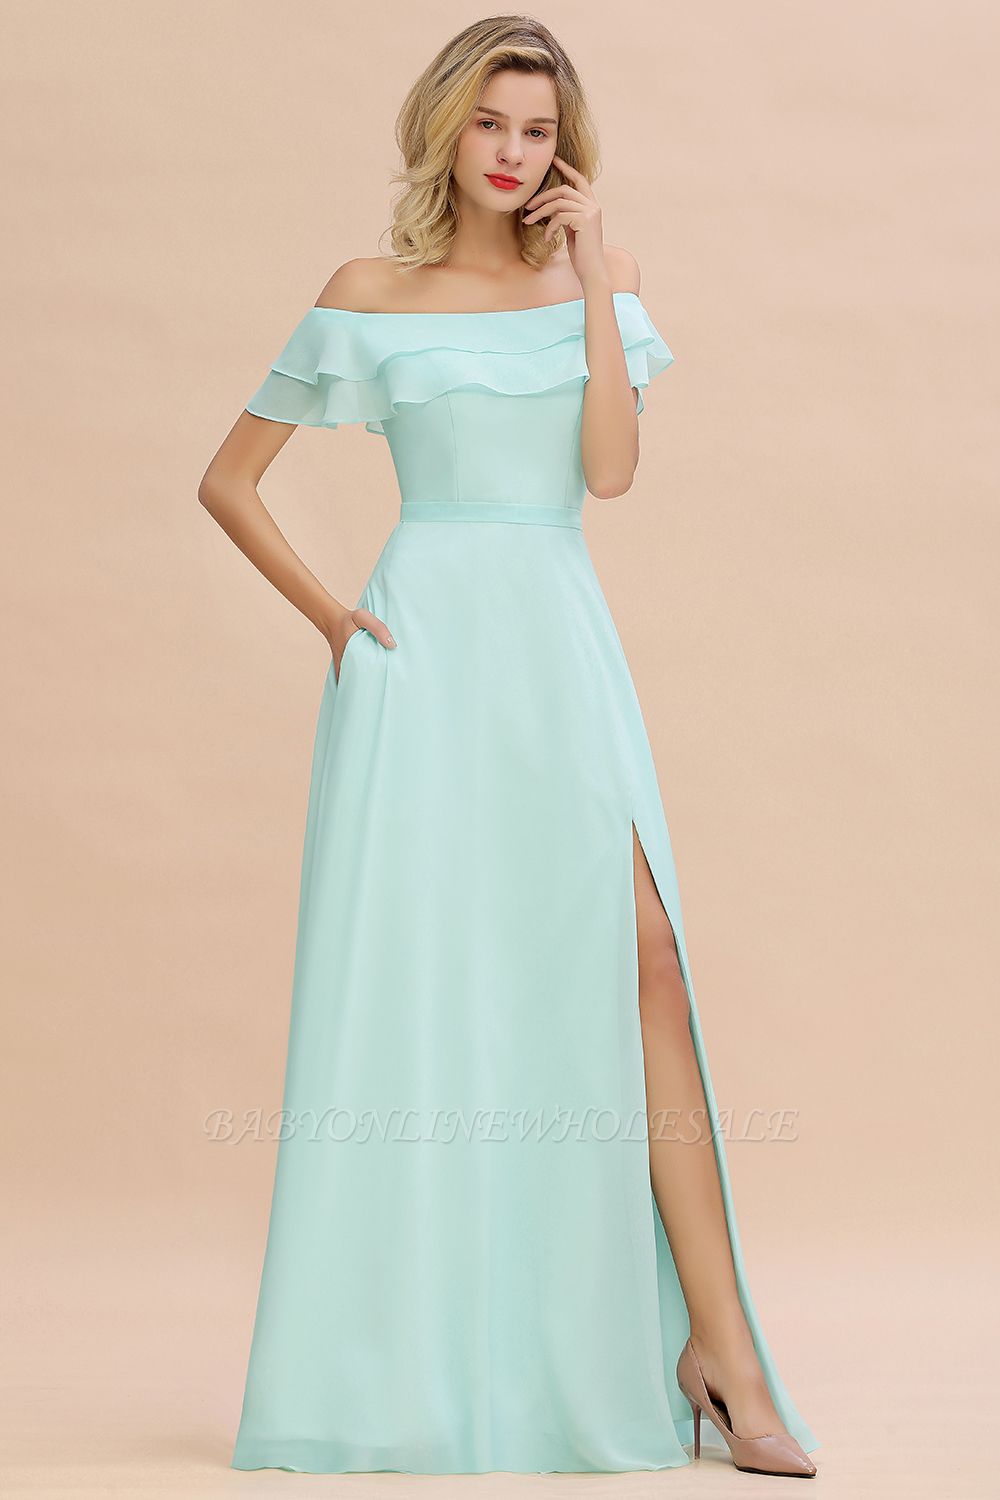 High Quality Off-the-Shoulder Front-Slit Mint Green Bridesmaid Dress